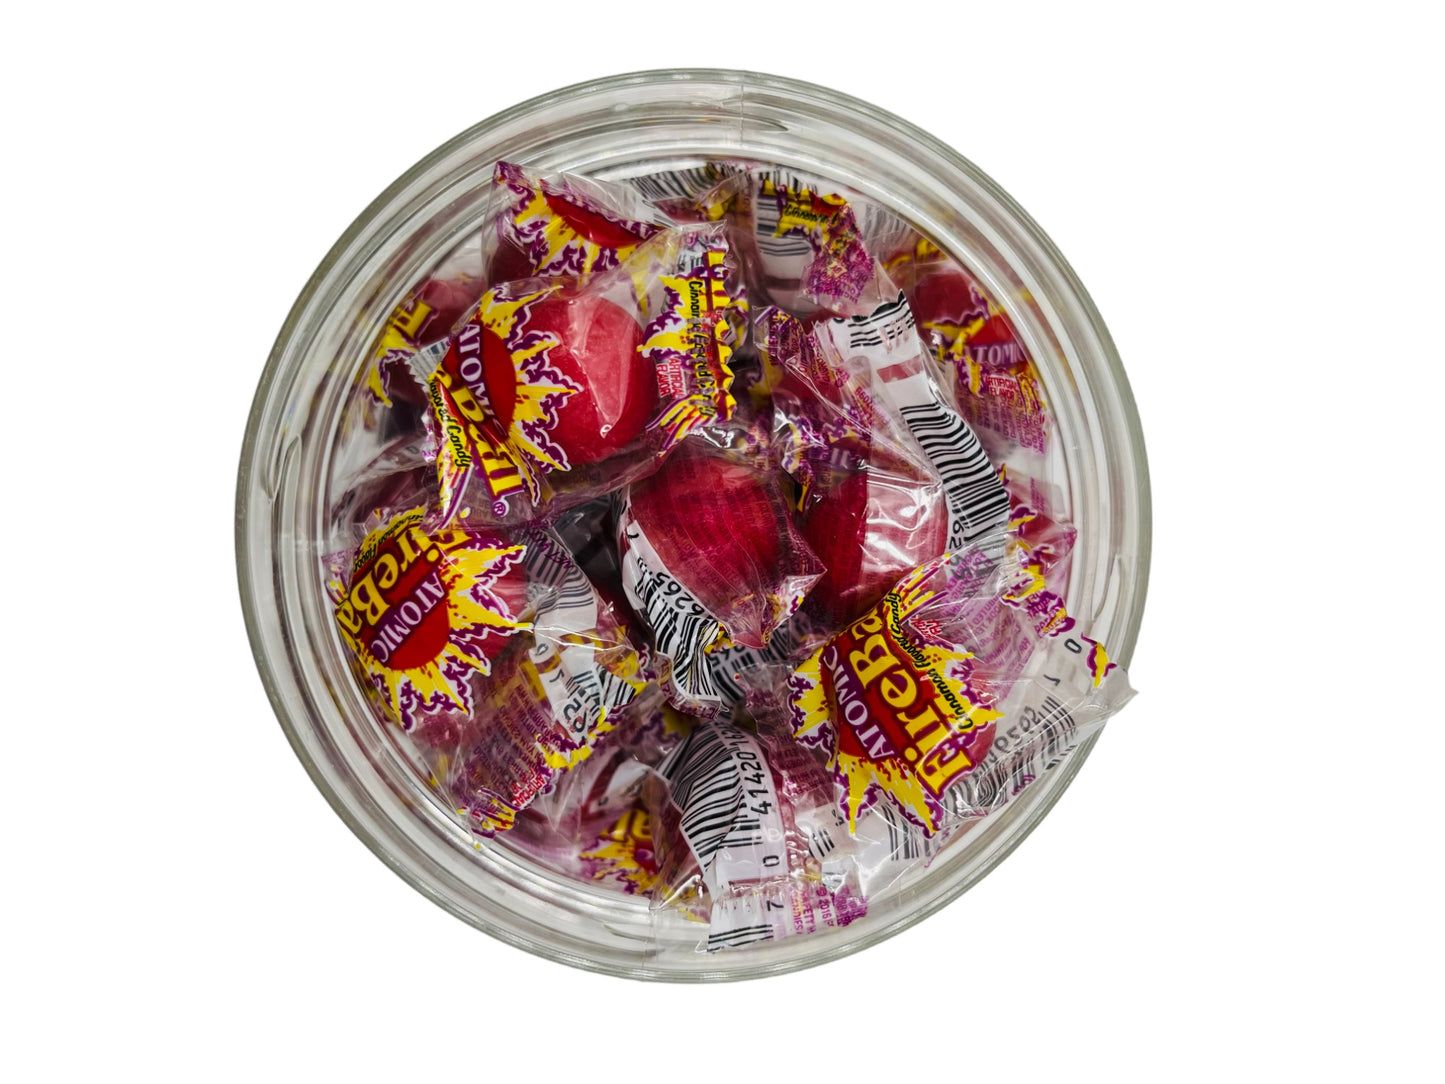 Simway Sweets Jar 600g - Atomic Fireballs - Individually Wrapped American Sweets - Approximately 80 Pieces